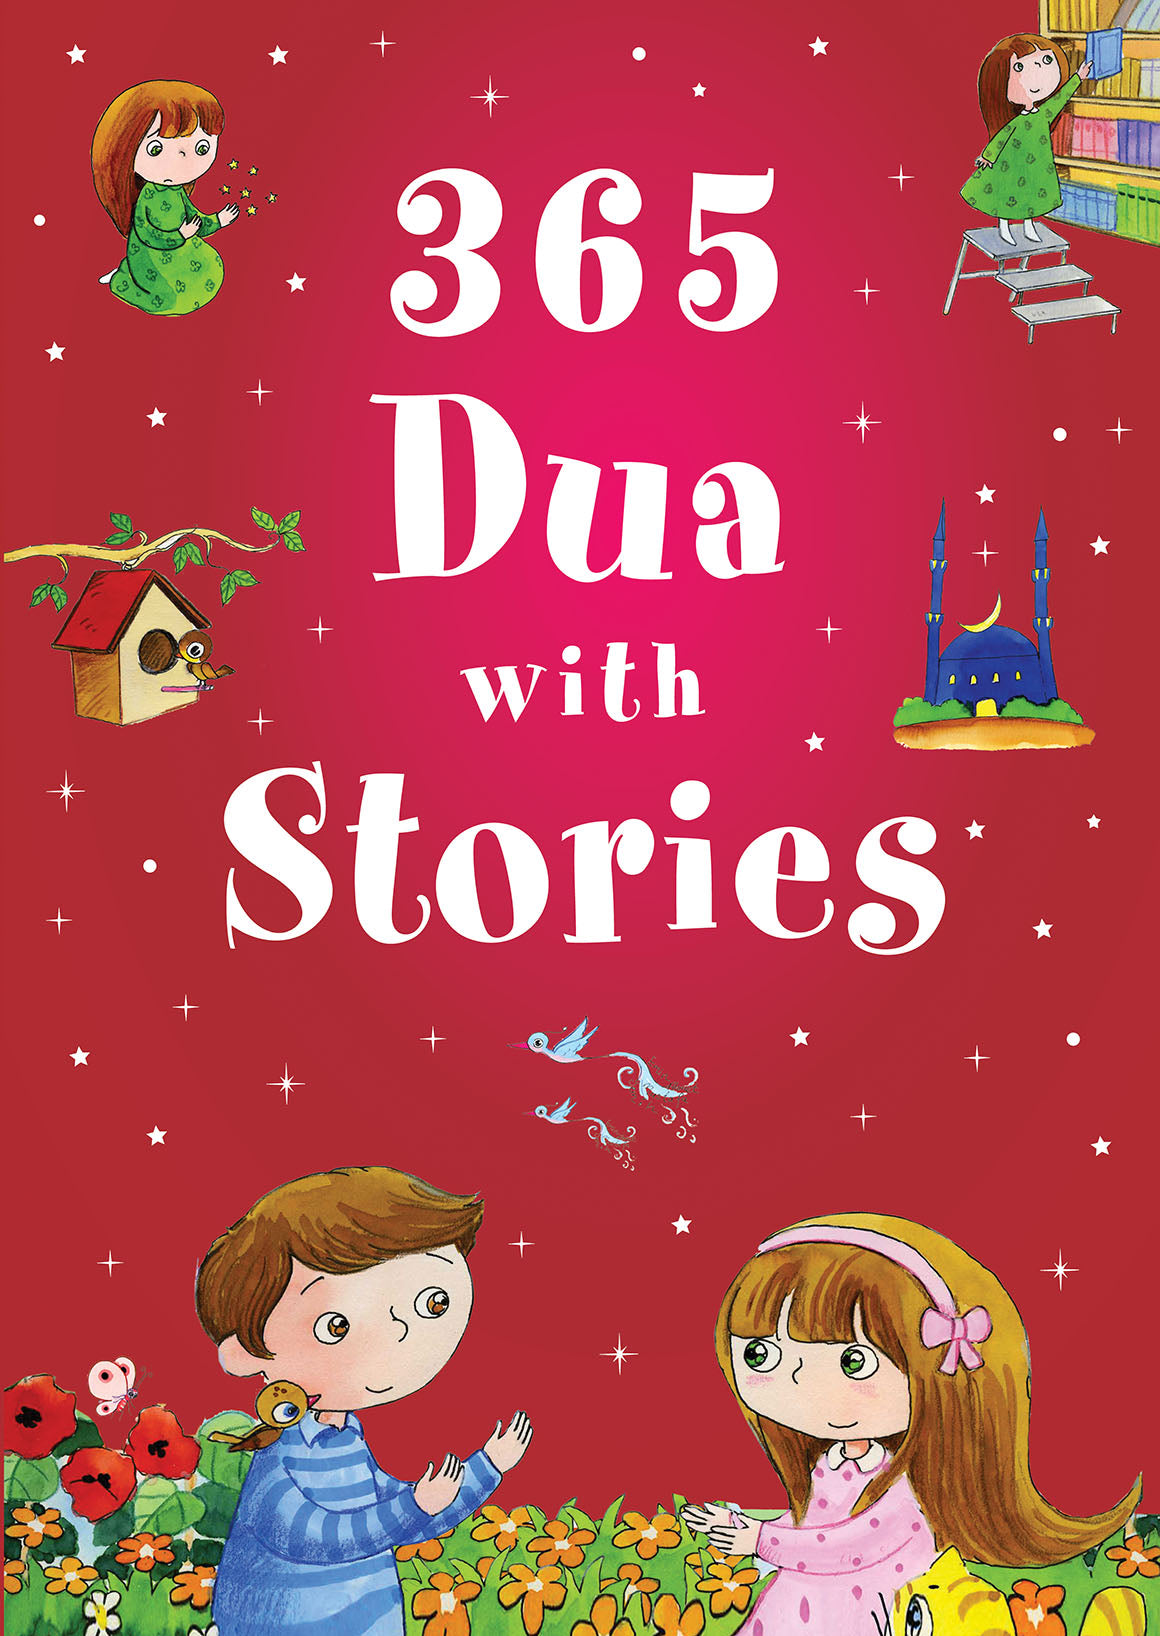 365 Dua with Stories for Kids-Islamic Books-Goodword-Crescent Moon Store